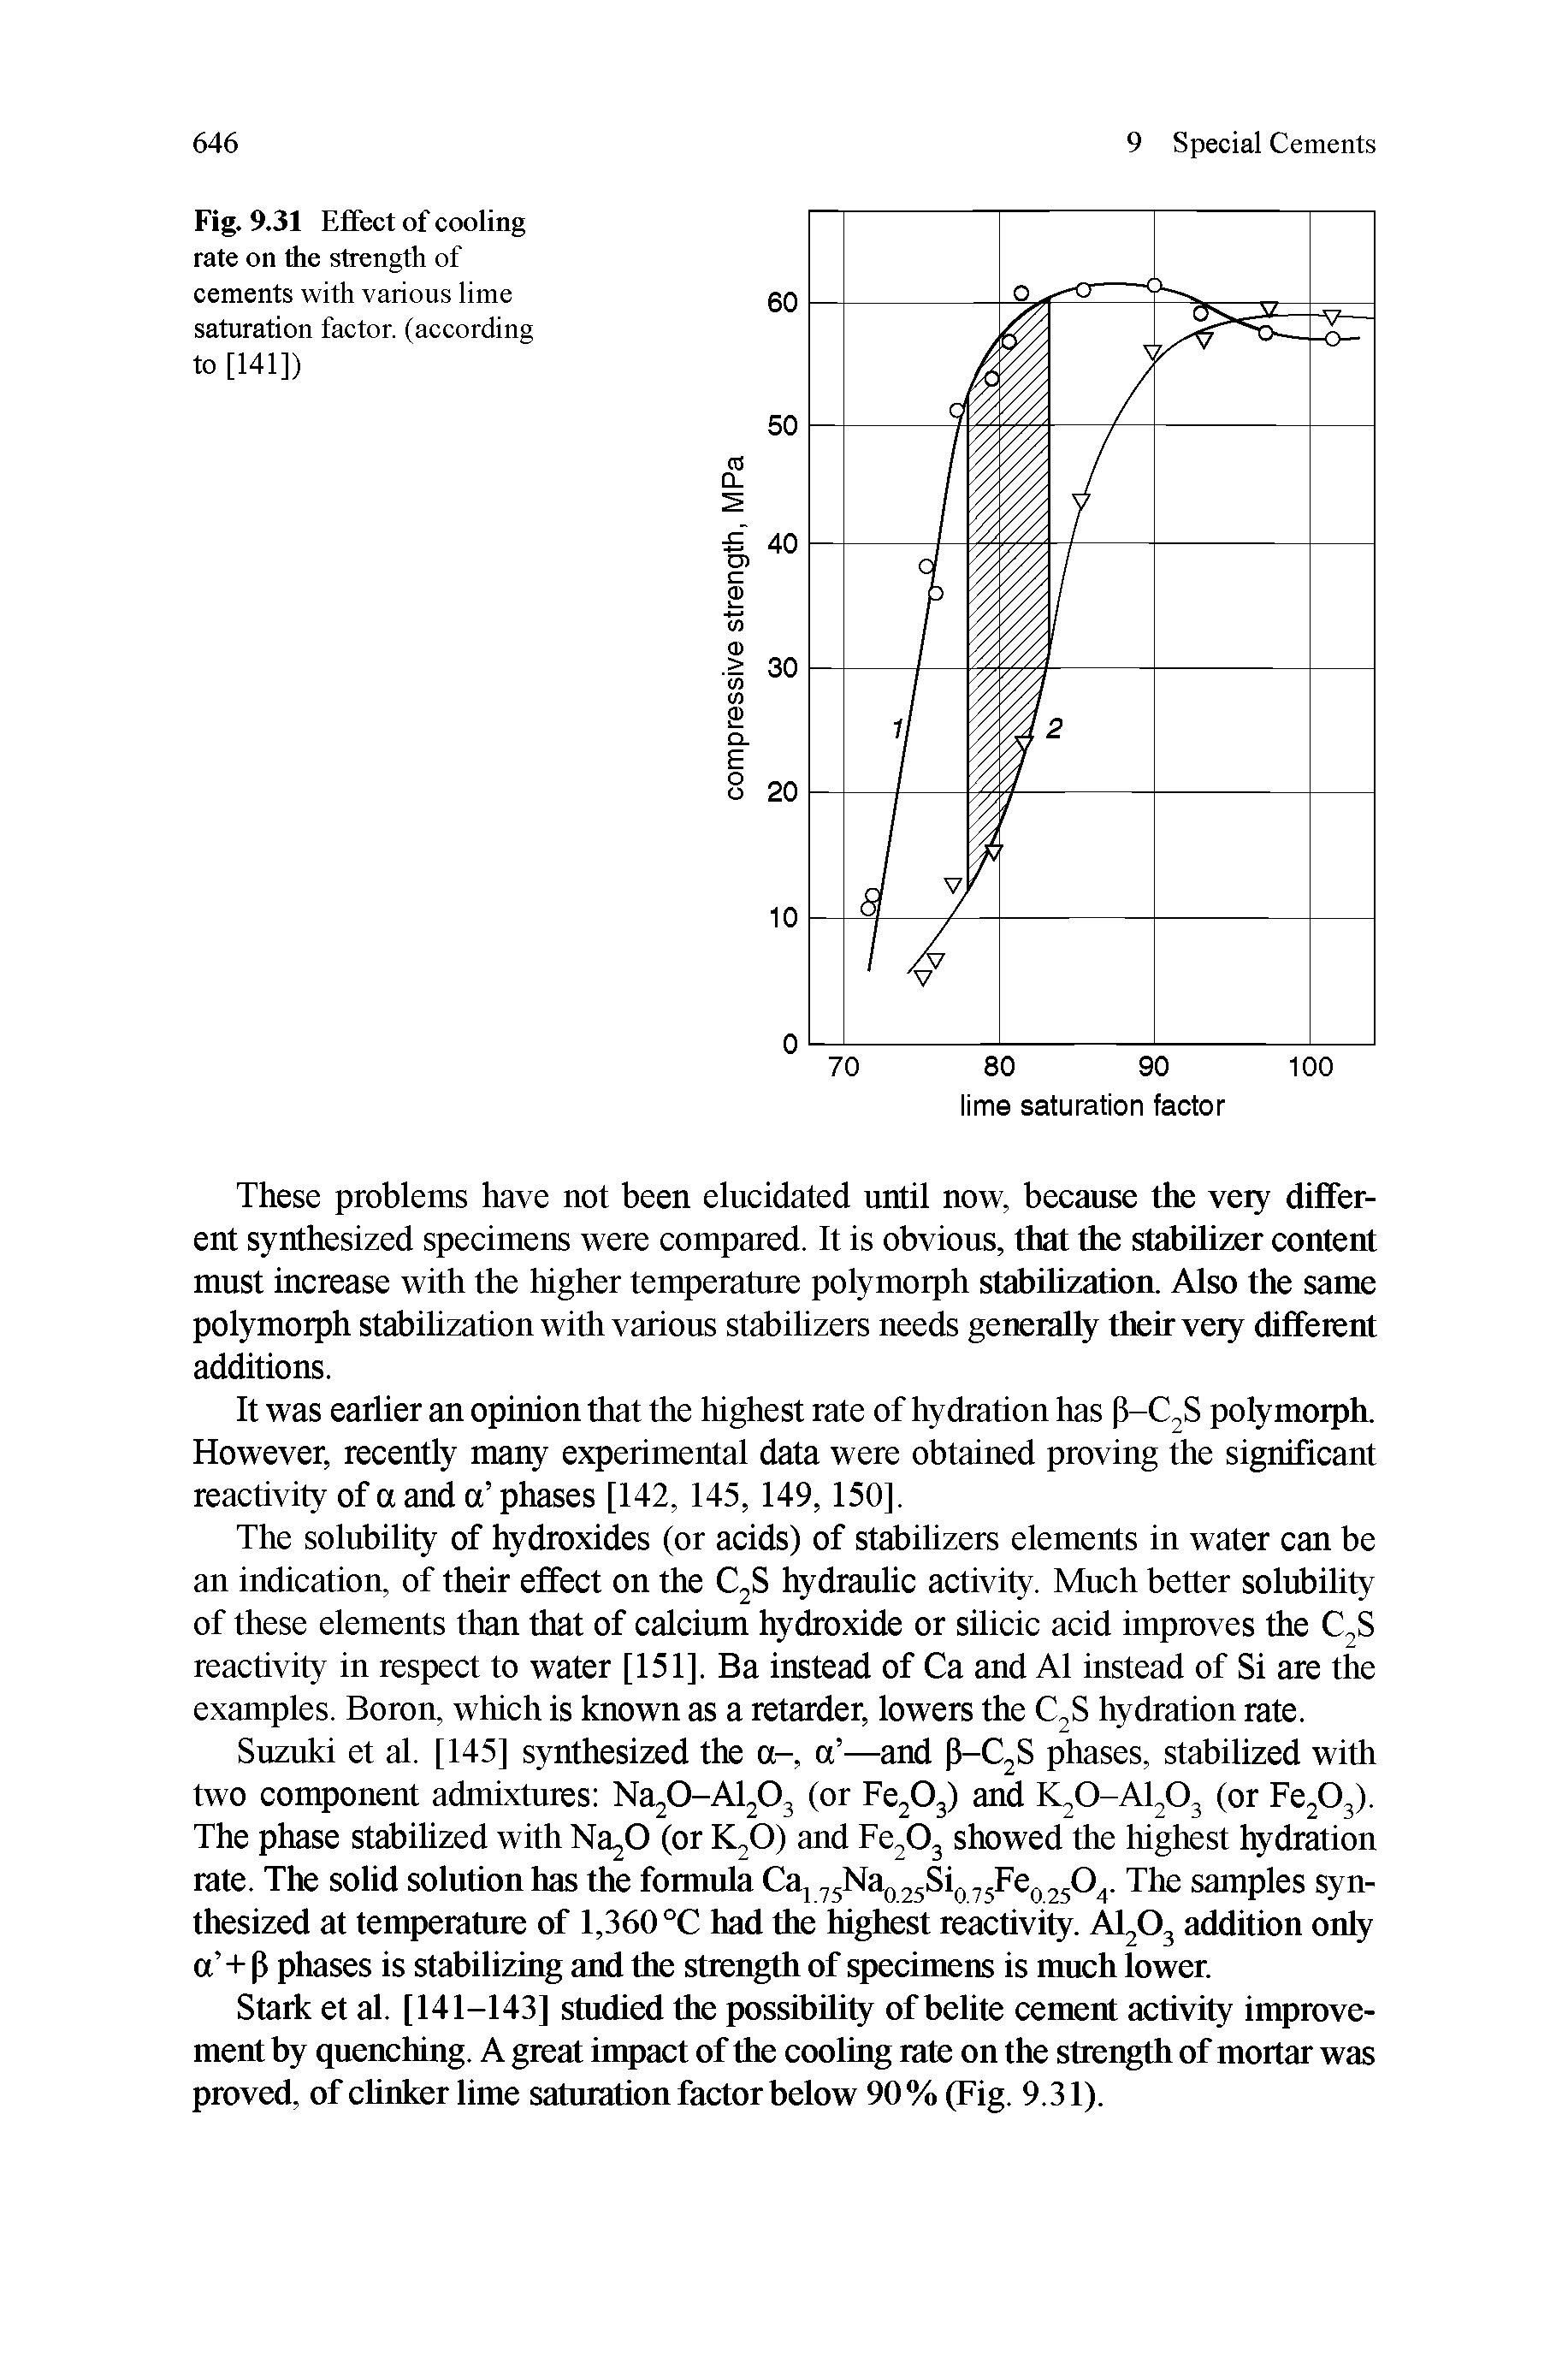 Fig. 9.31 Effect of cooling rate on the strength of cements with various lime saturation factor, (according to [141])...